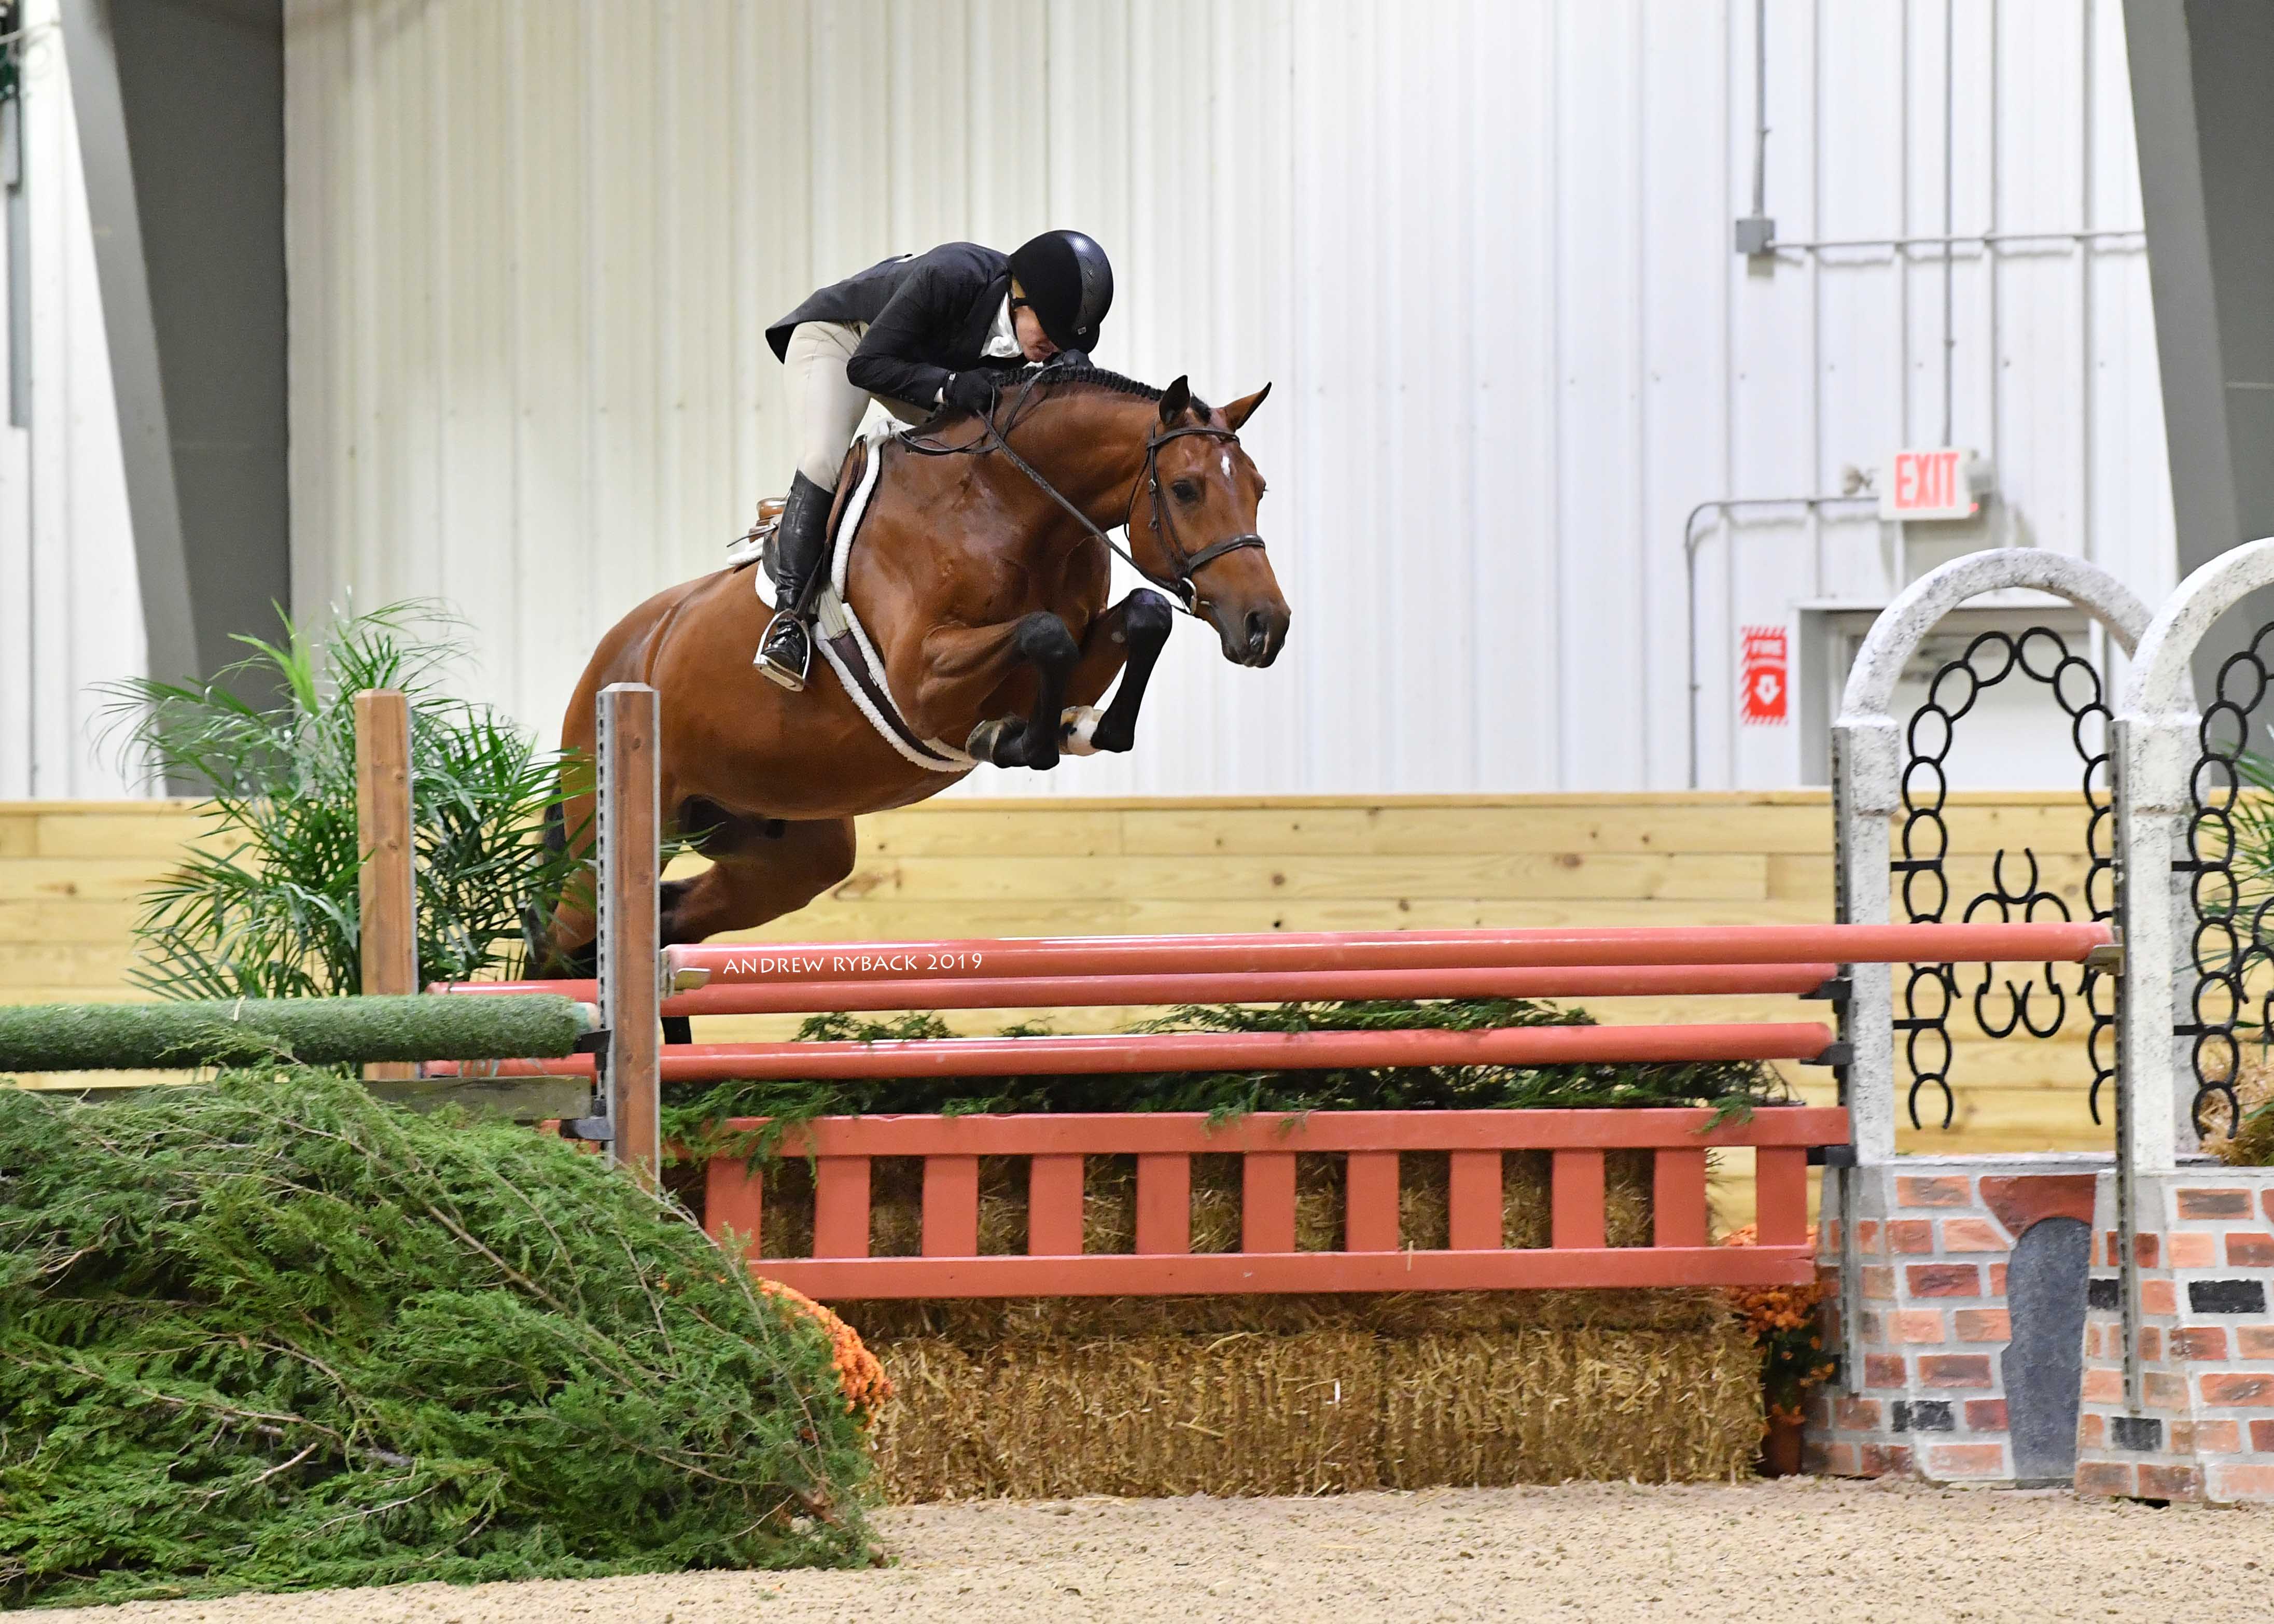 Greg Crolick and Corallo Equestrian Top Center in $40,000 Derby Honors the Take USHJA - World International Z Hunter